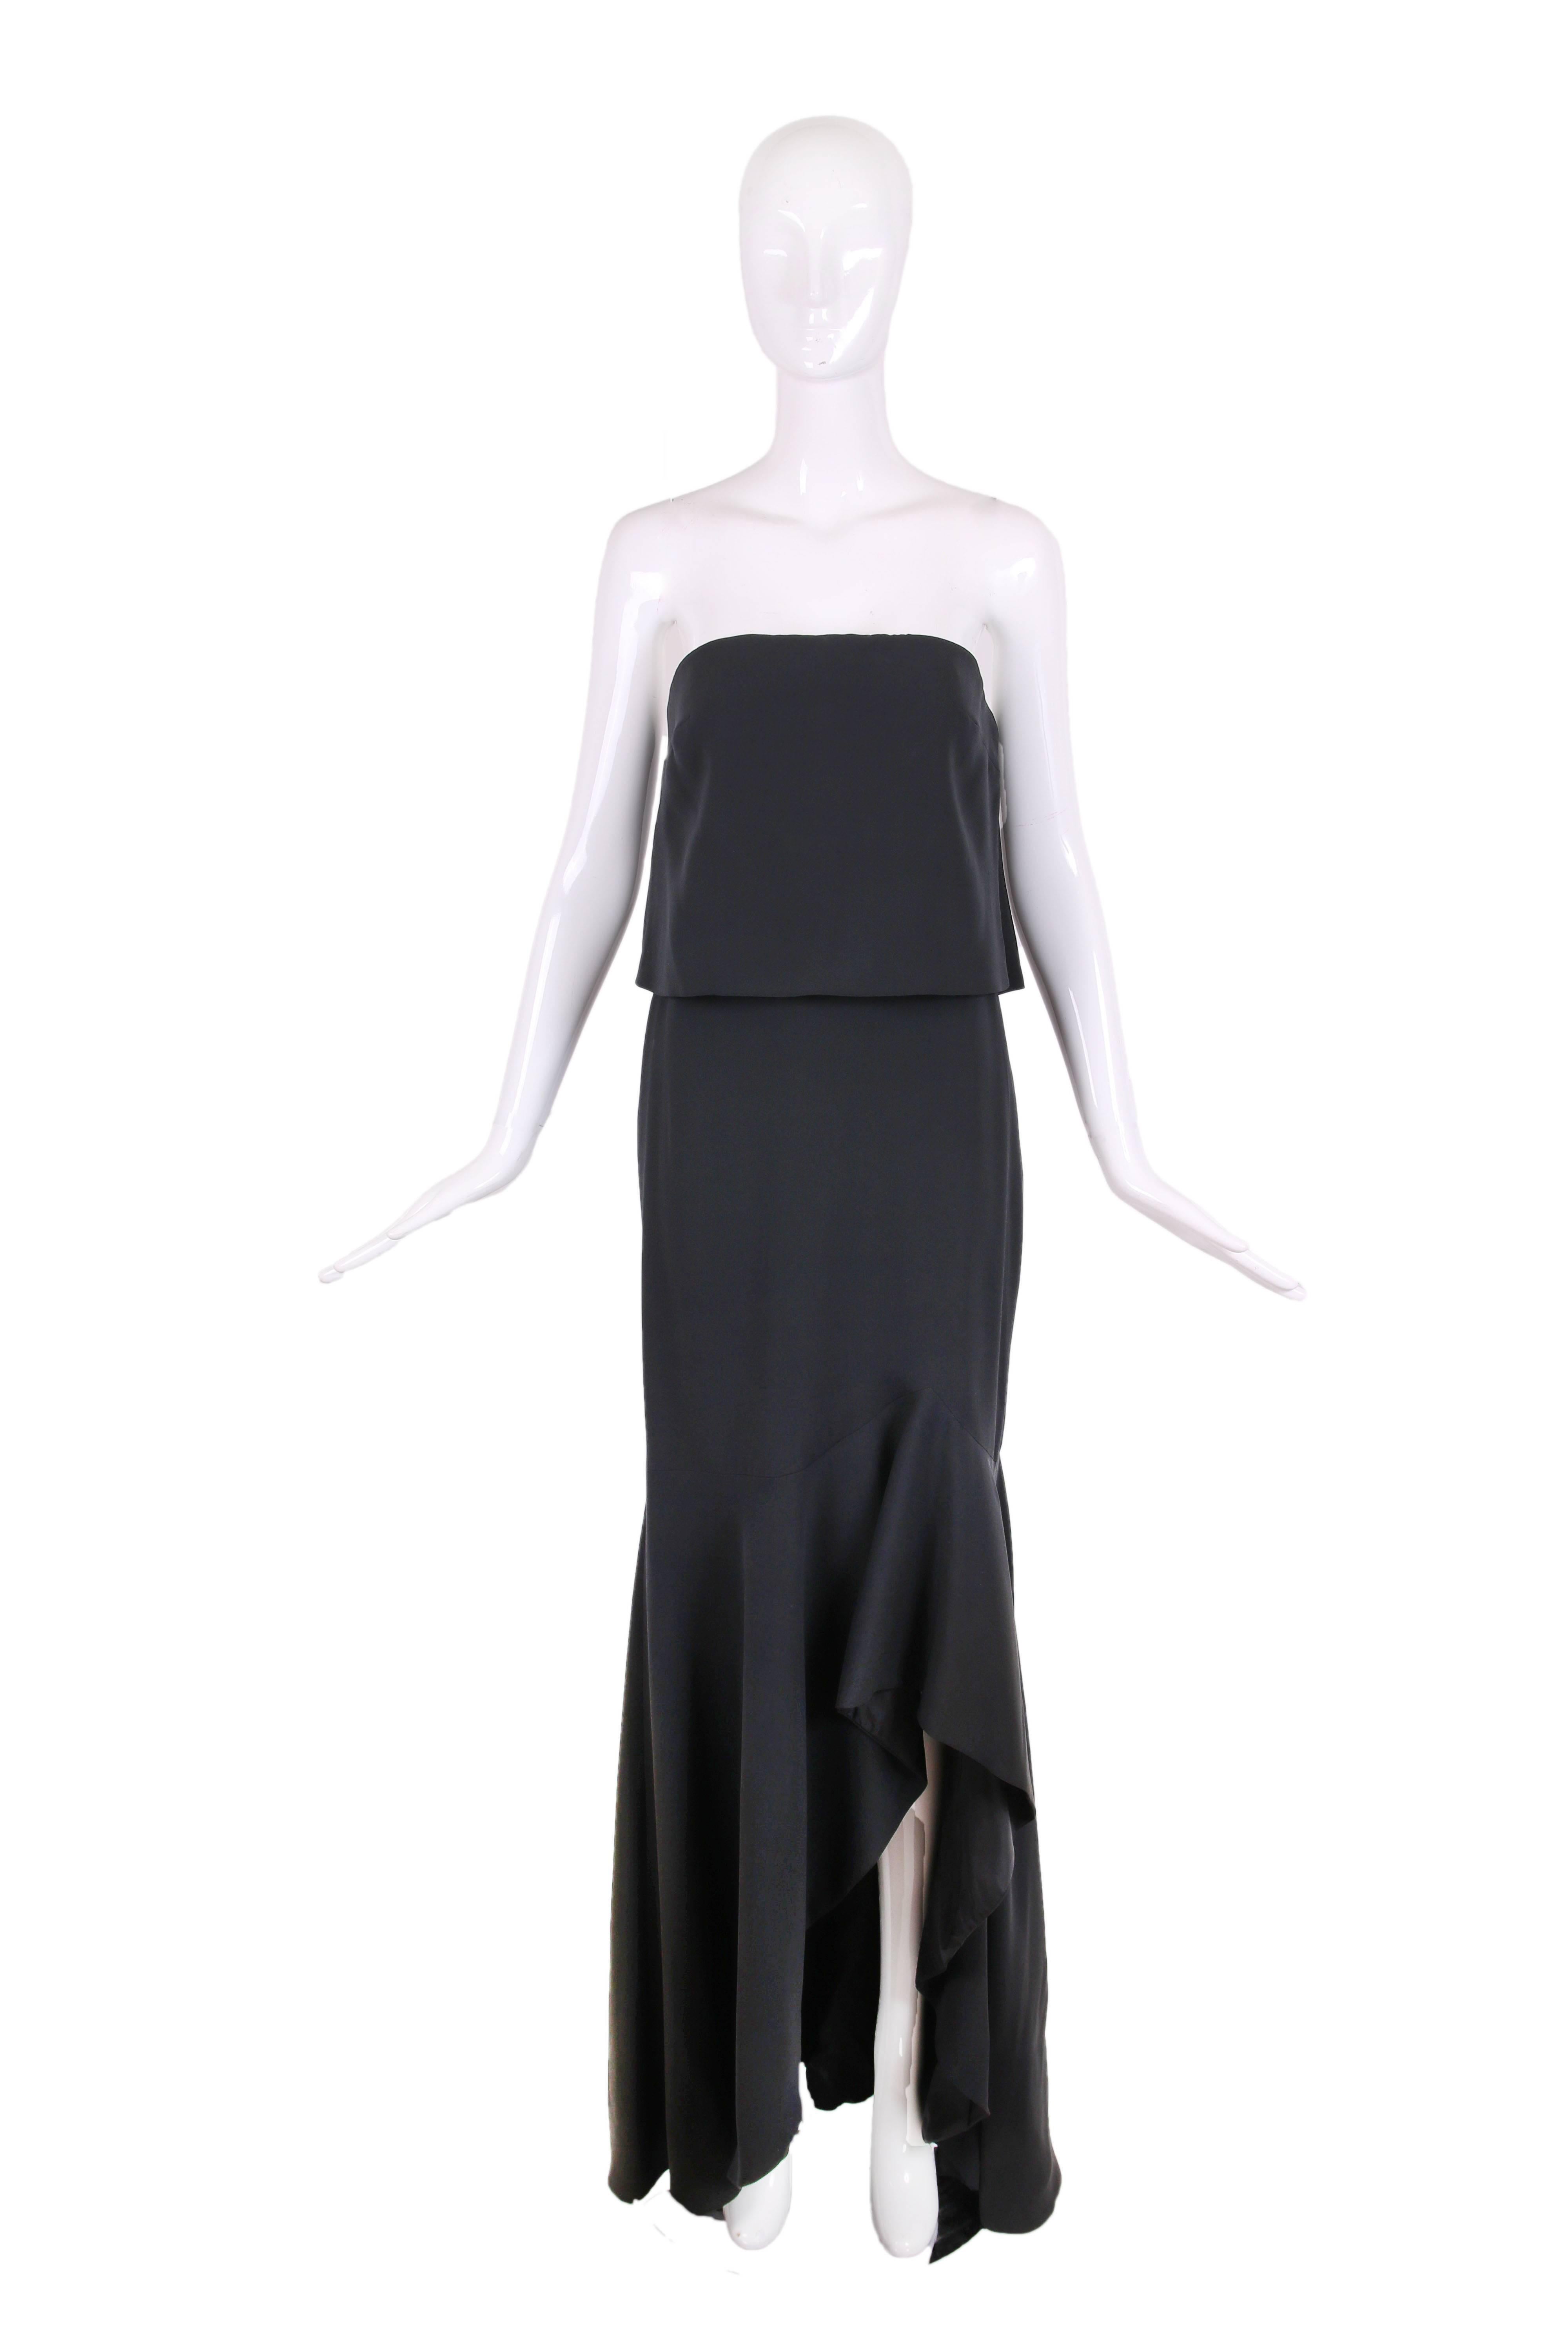 Tom Ford black silk blend strapless gown with a piece of fabric laying on top of a hidden bustier at the bodice with interior boning, a dramatic and slightly ruffled frontal slit and matching bolero top. Size 38, in excellent condition. Please see